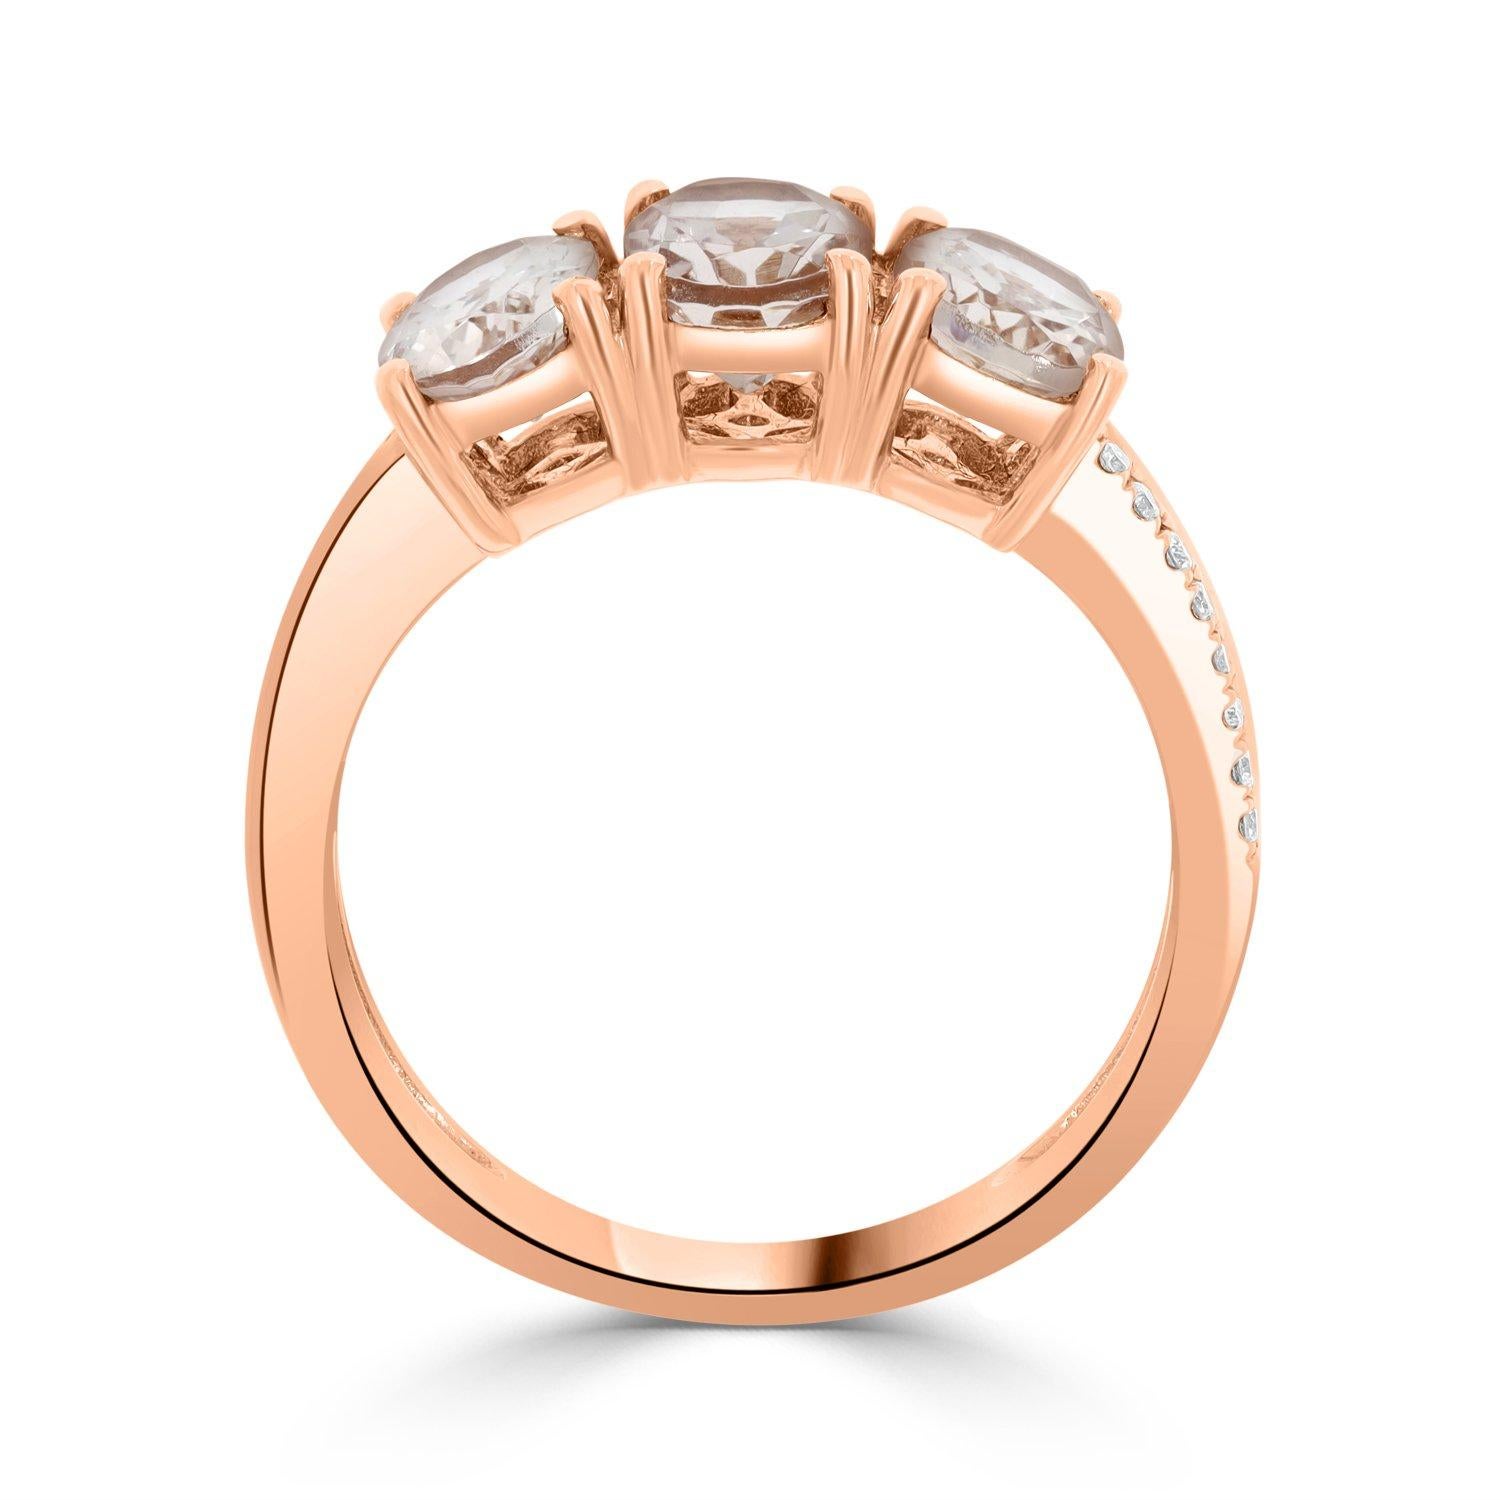 2.08 Morganite Rings with 0.07tct Diamond Set in 14K Rose Gold For Sale 1